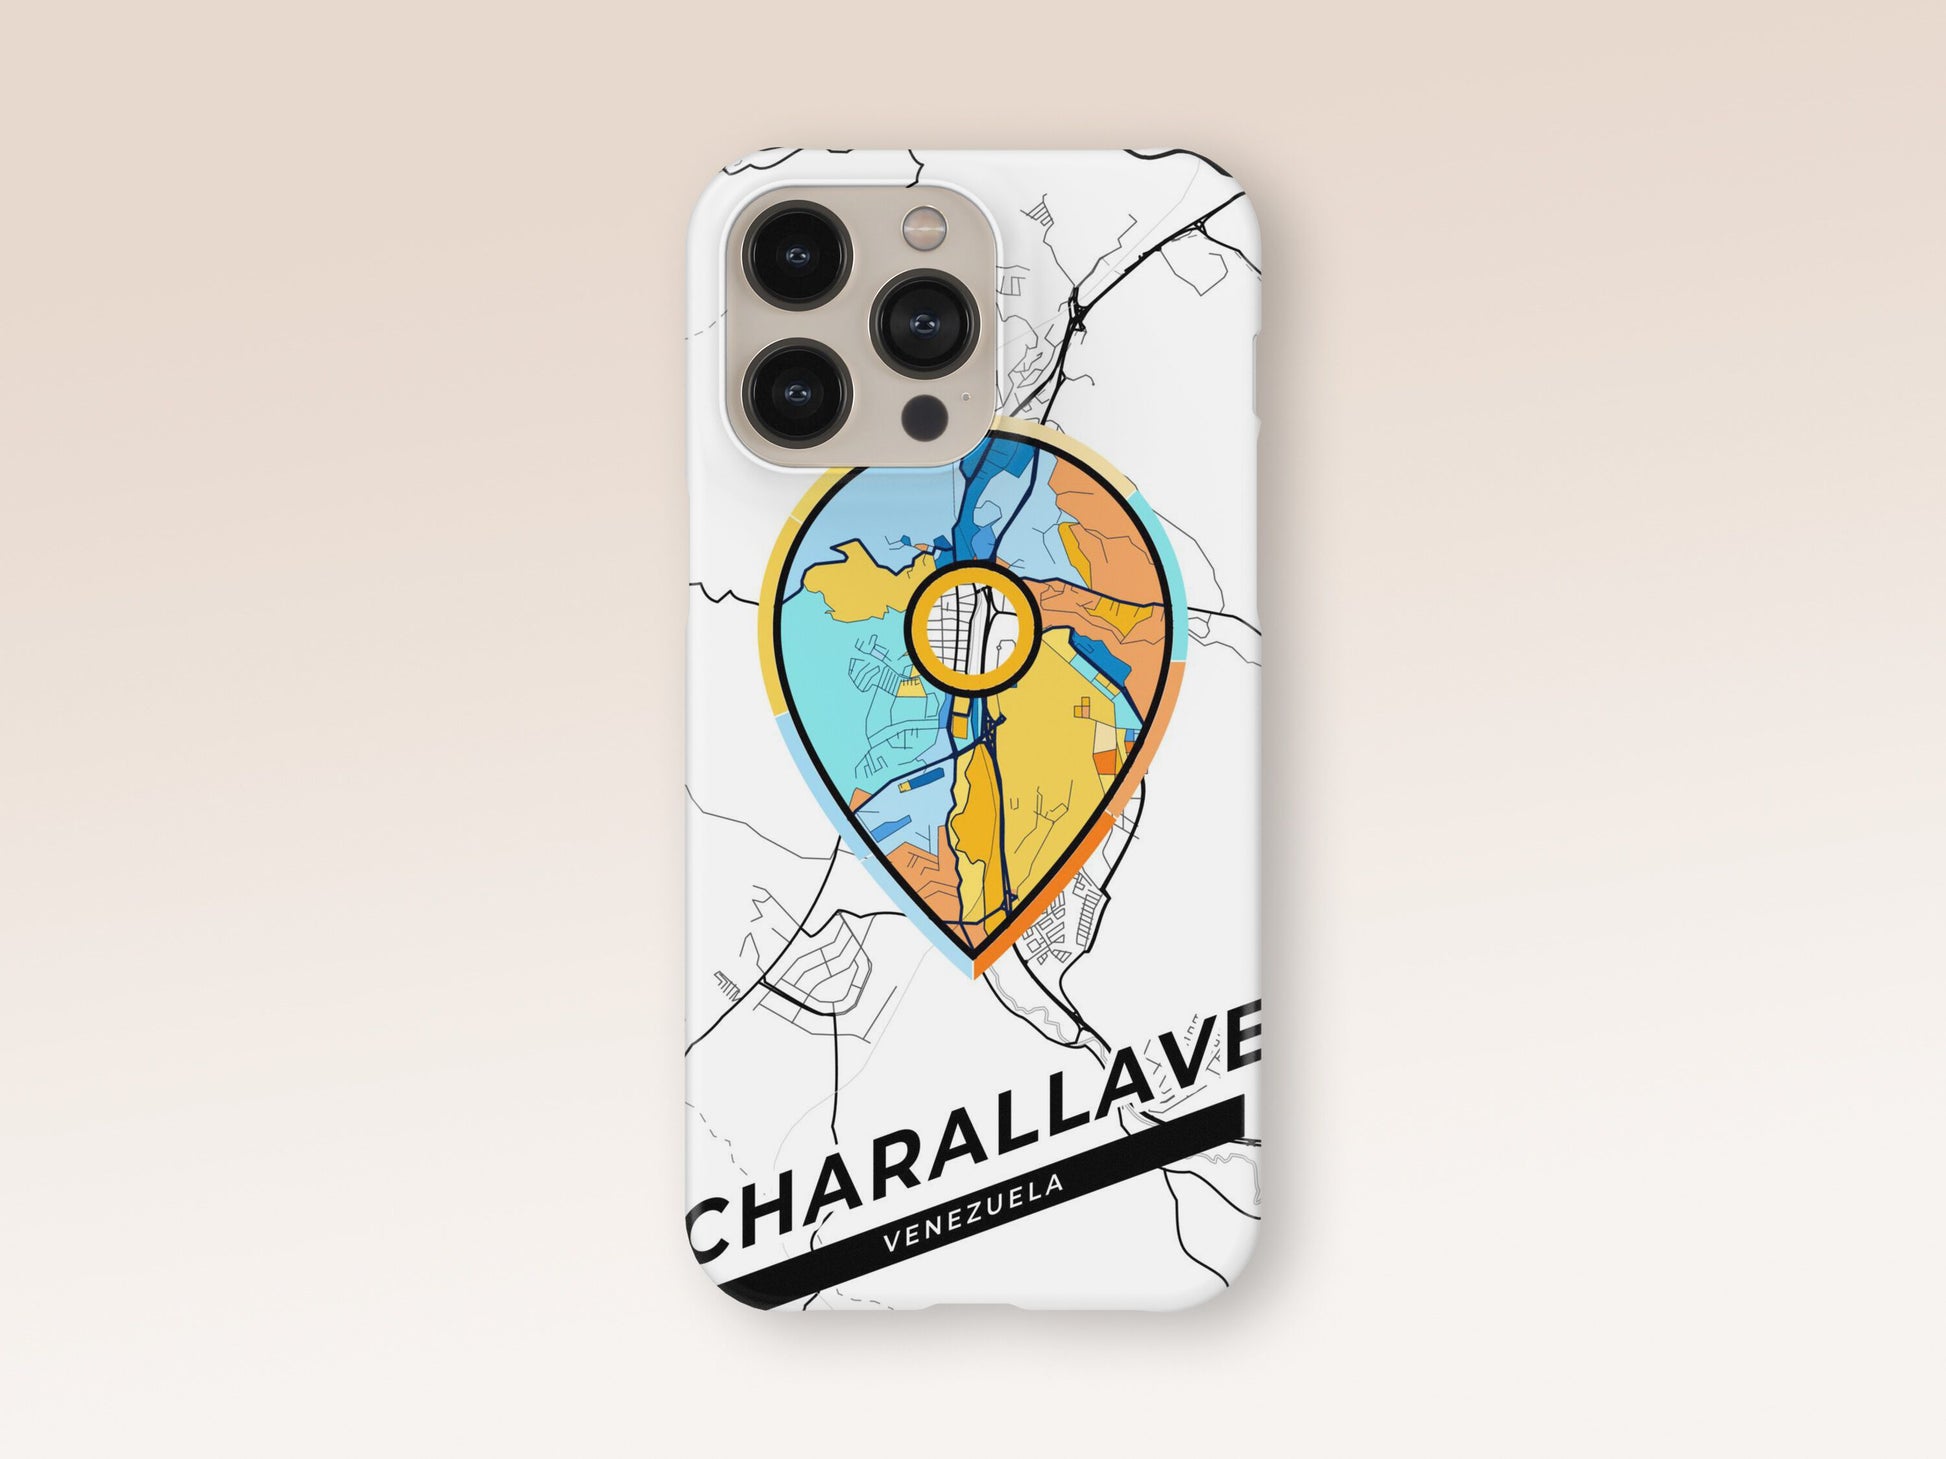 Charallave Venezuela slim phone case with colorful icon. Birthday, wedding or housewarming gift. Couple match cases. 1